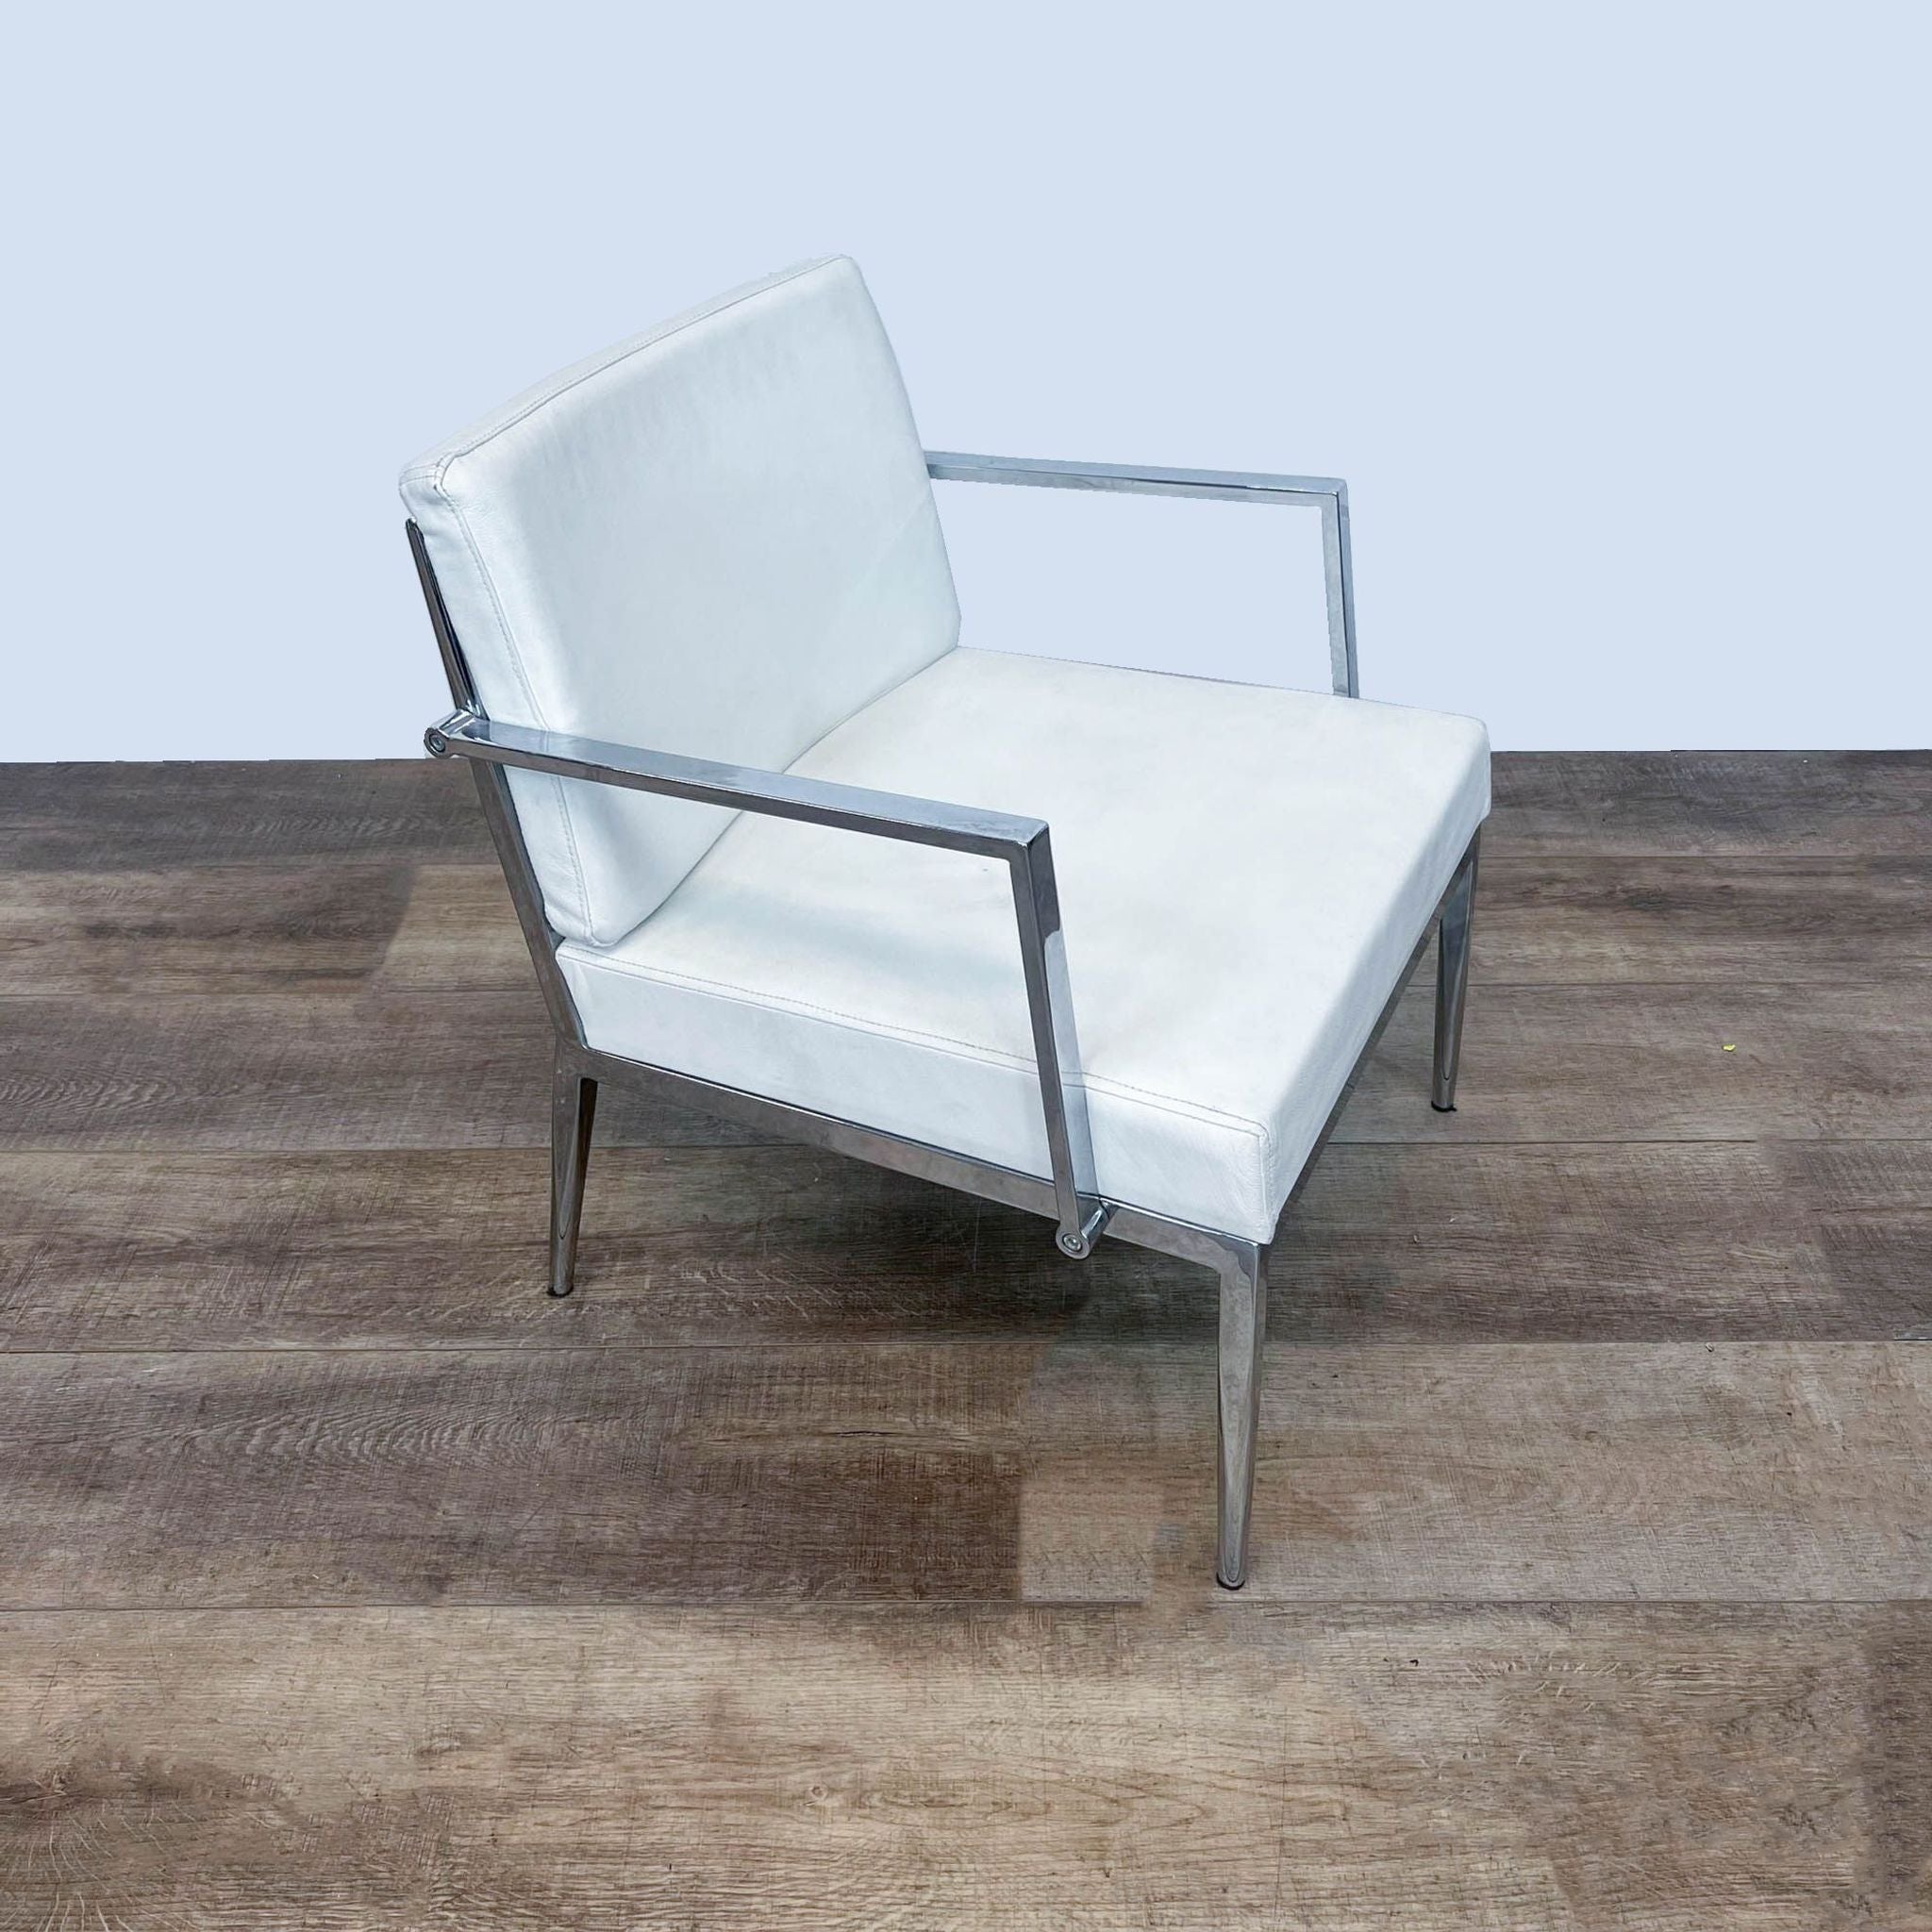 Reperch modern white leather armchair with chrome frame on wooden floor.